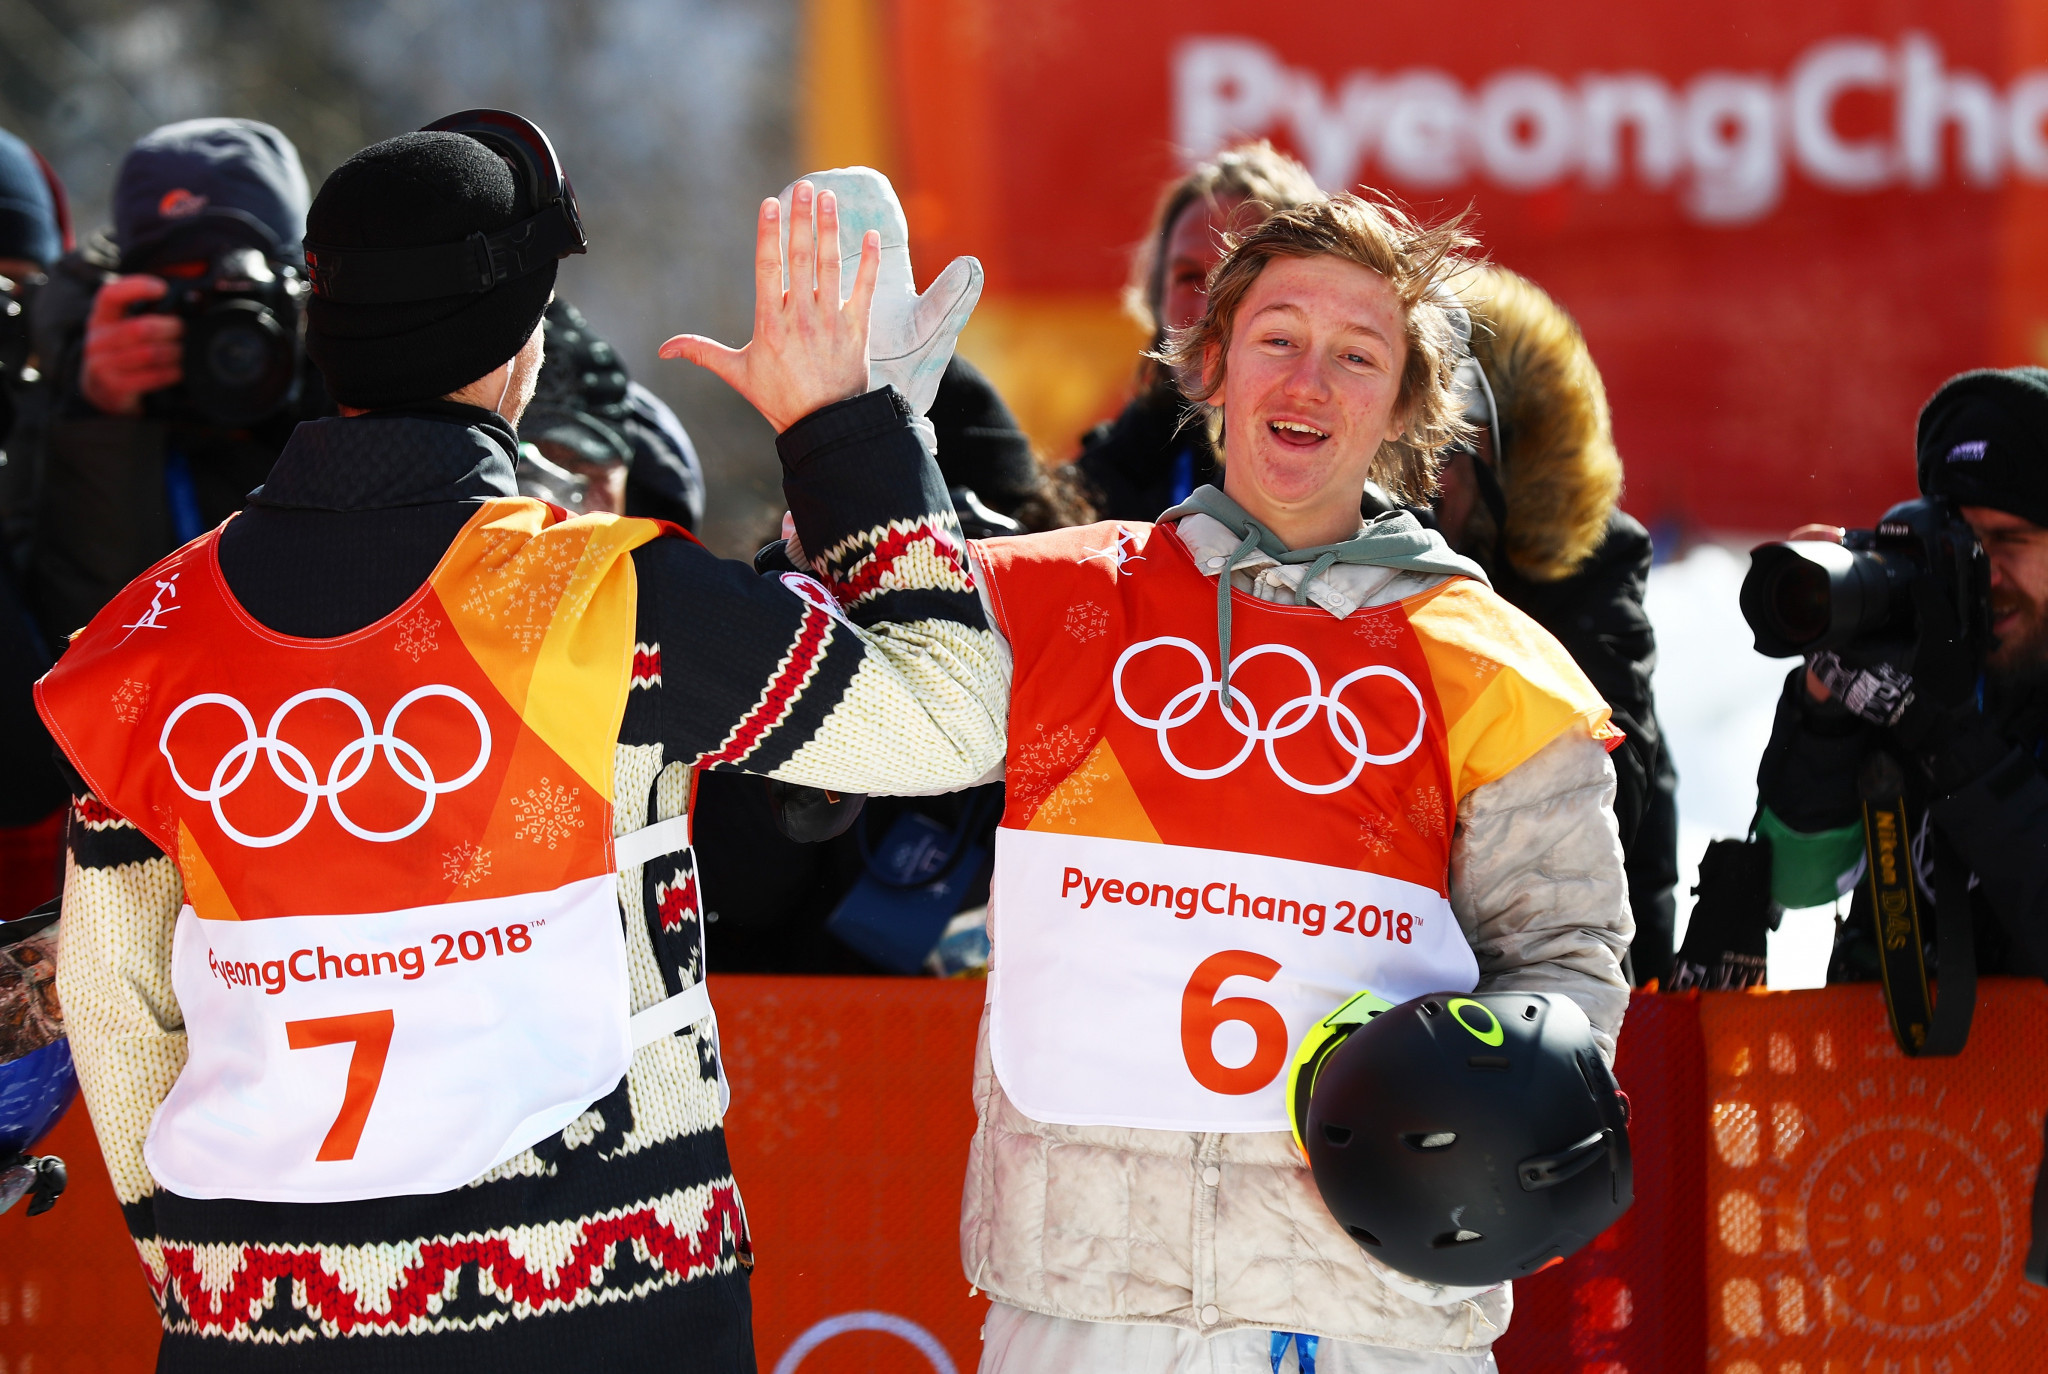 Teenager Redmond Gerard claimed the United States’ first gold medal of the Pyeongchang 2018 Winter Olympic Games with victory in the men’s slopestyle snowboarding event at Phoenix Park today ©Getty Images